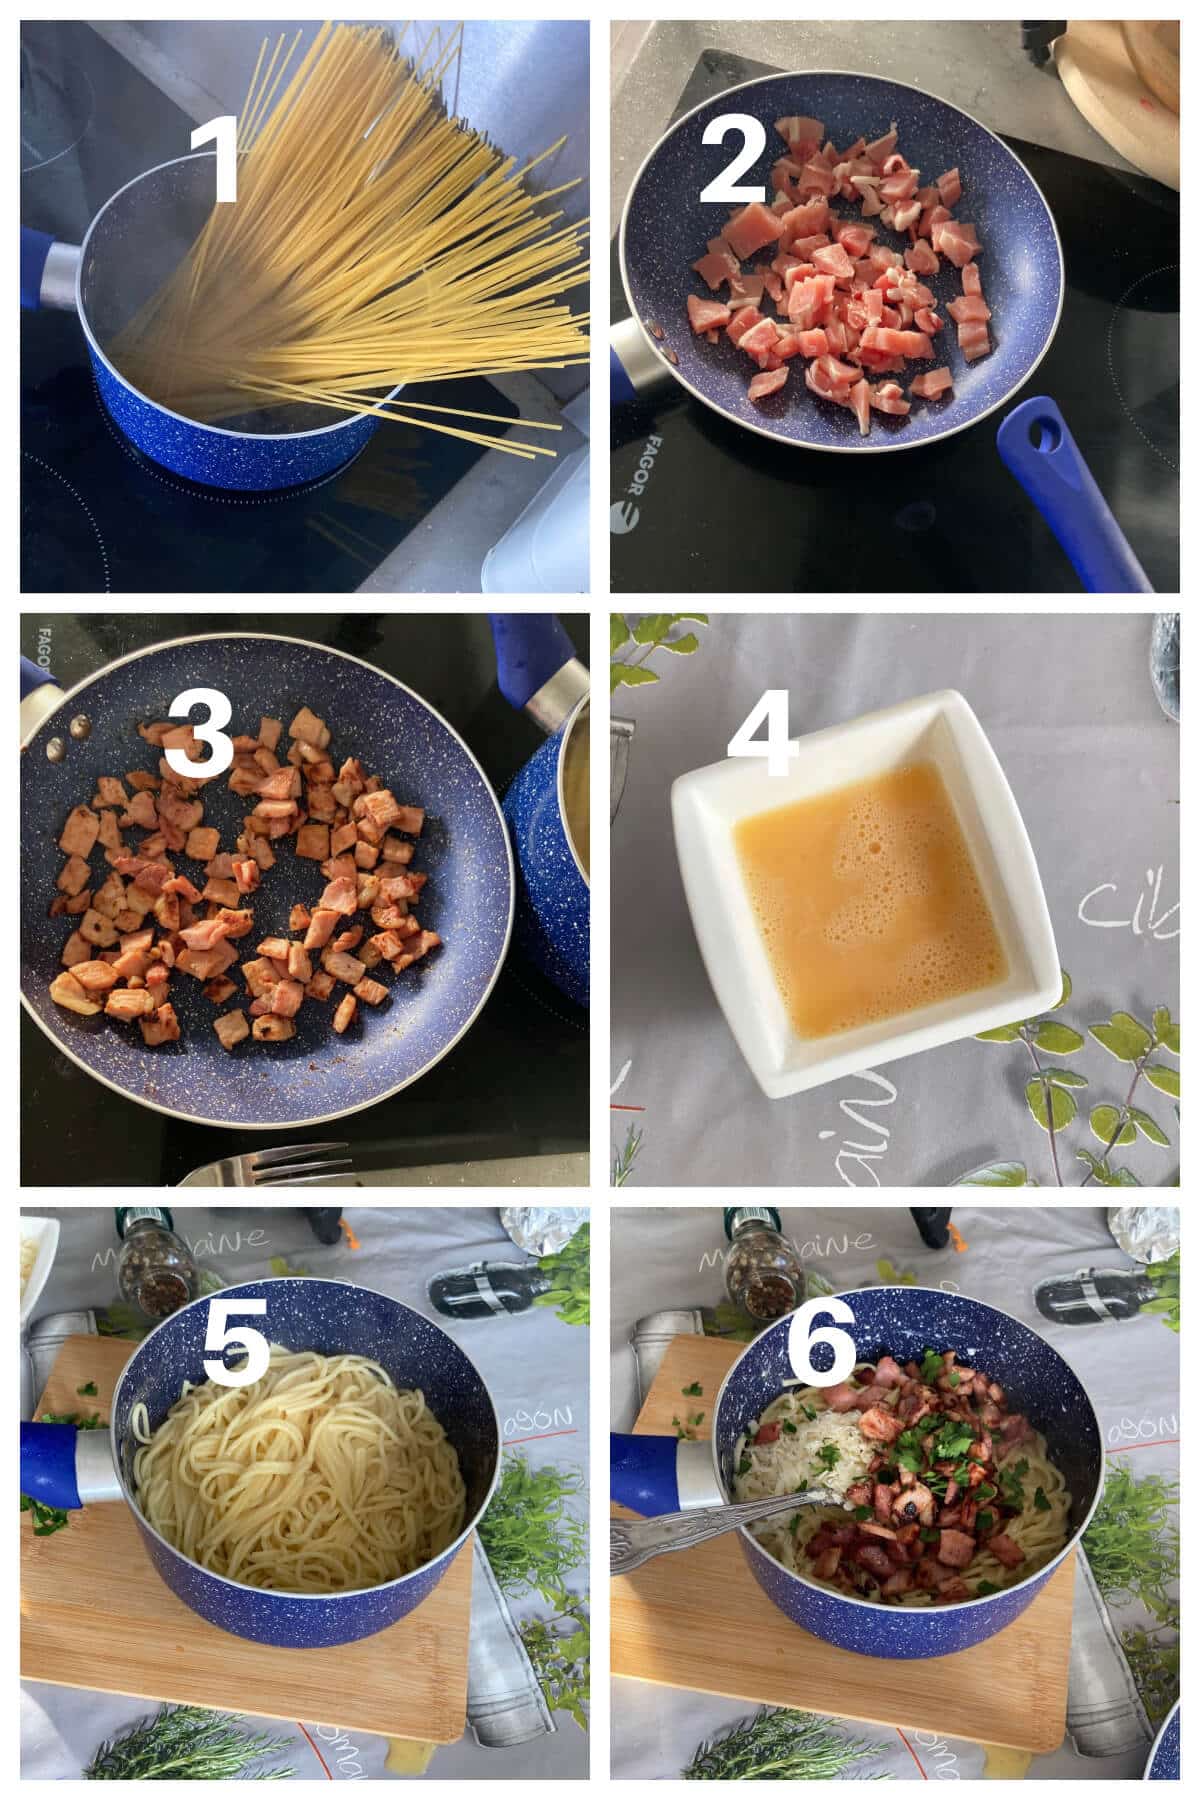 Collage of 6 photos to show how to make bacon carbonara.